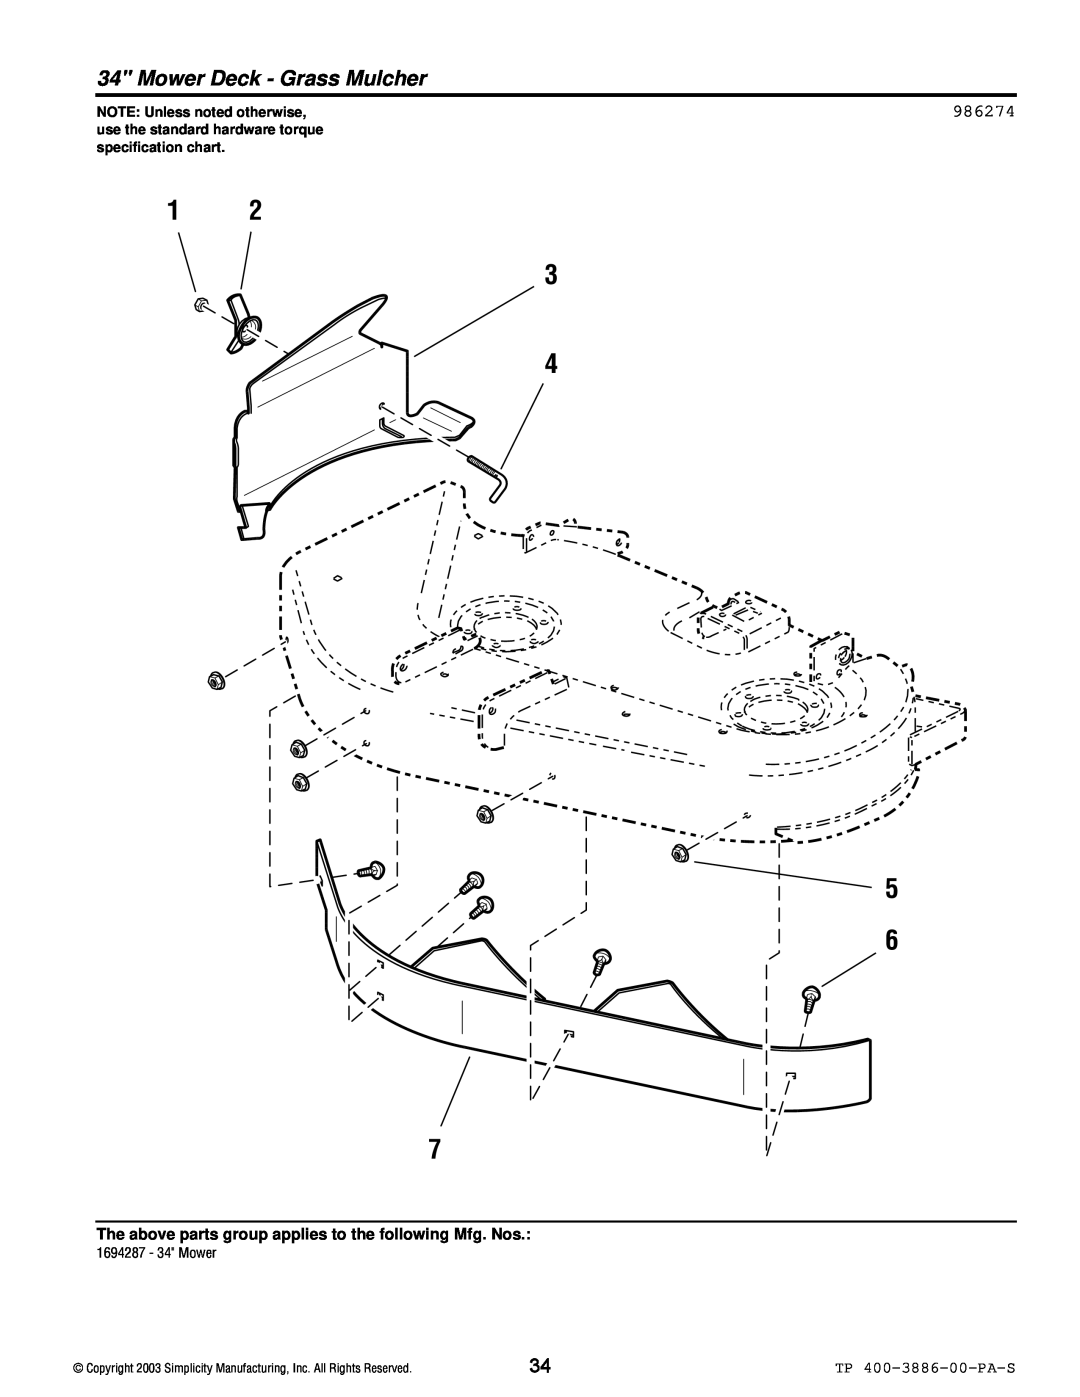 Simplicity Series Transaxle Mower Deck - Grass Mulcher, 986274, 1 3 4, TP 400-3886-00-PA-S, NOTE Unless noted otherwise 